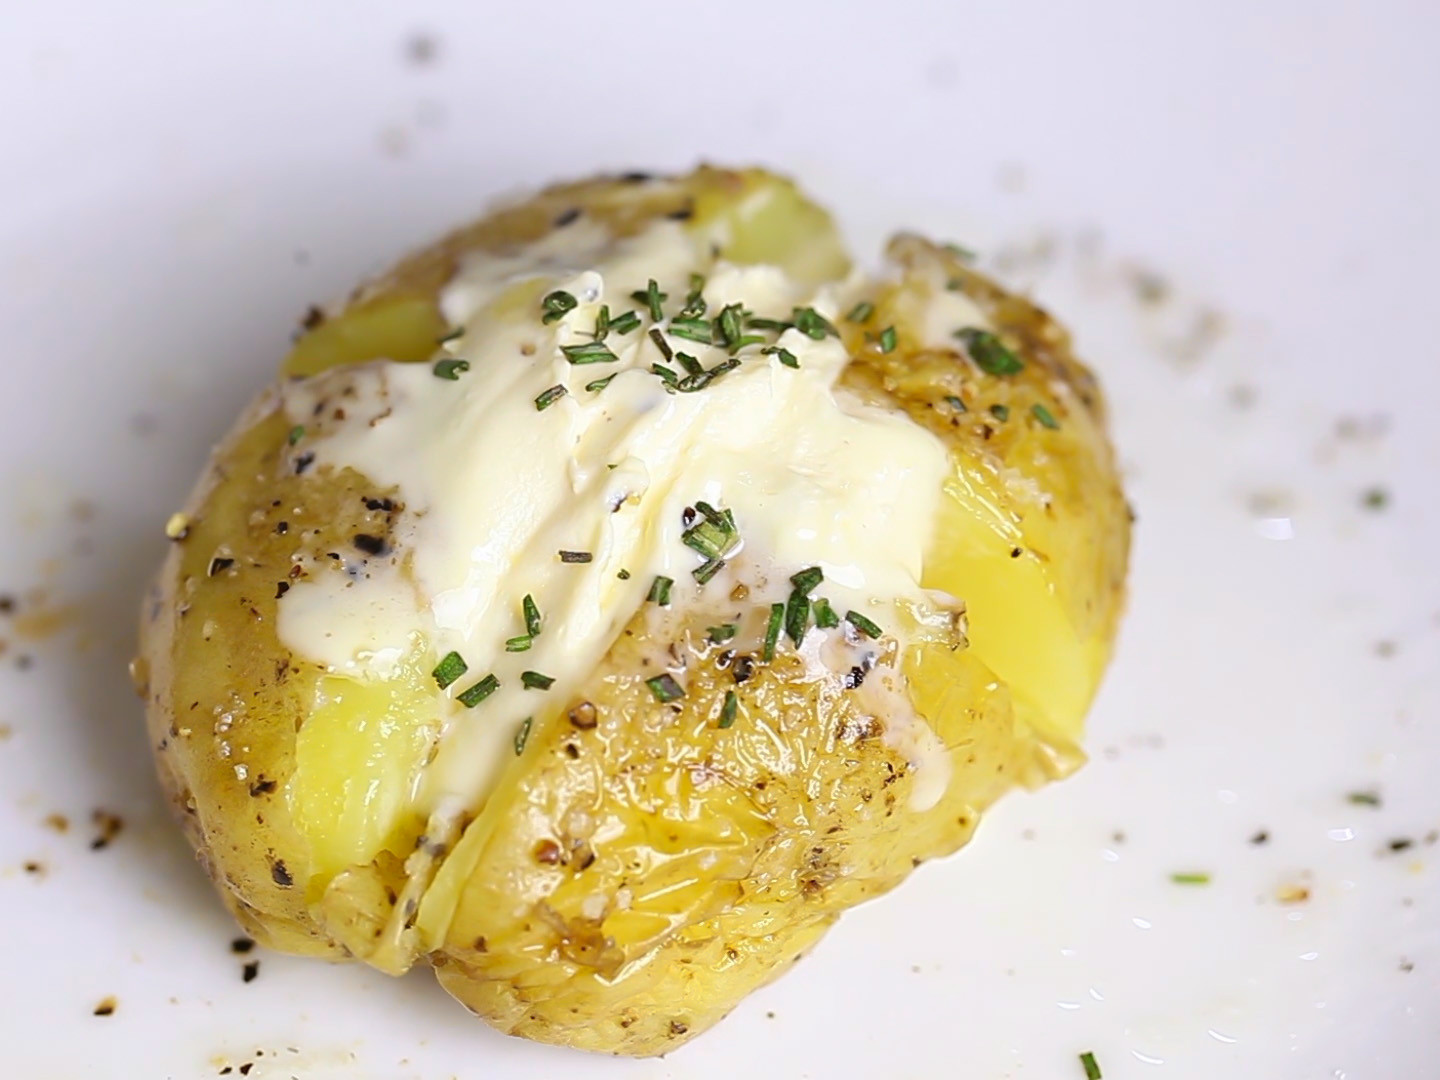 How To Make A Baked Potato In The Microwave
 How to Bake a Potato in the Microwave 9 Steps with